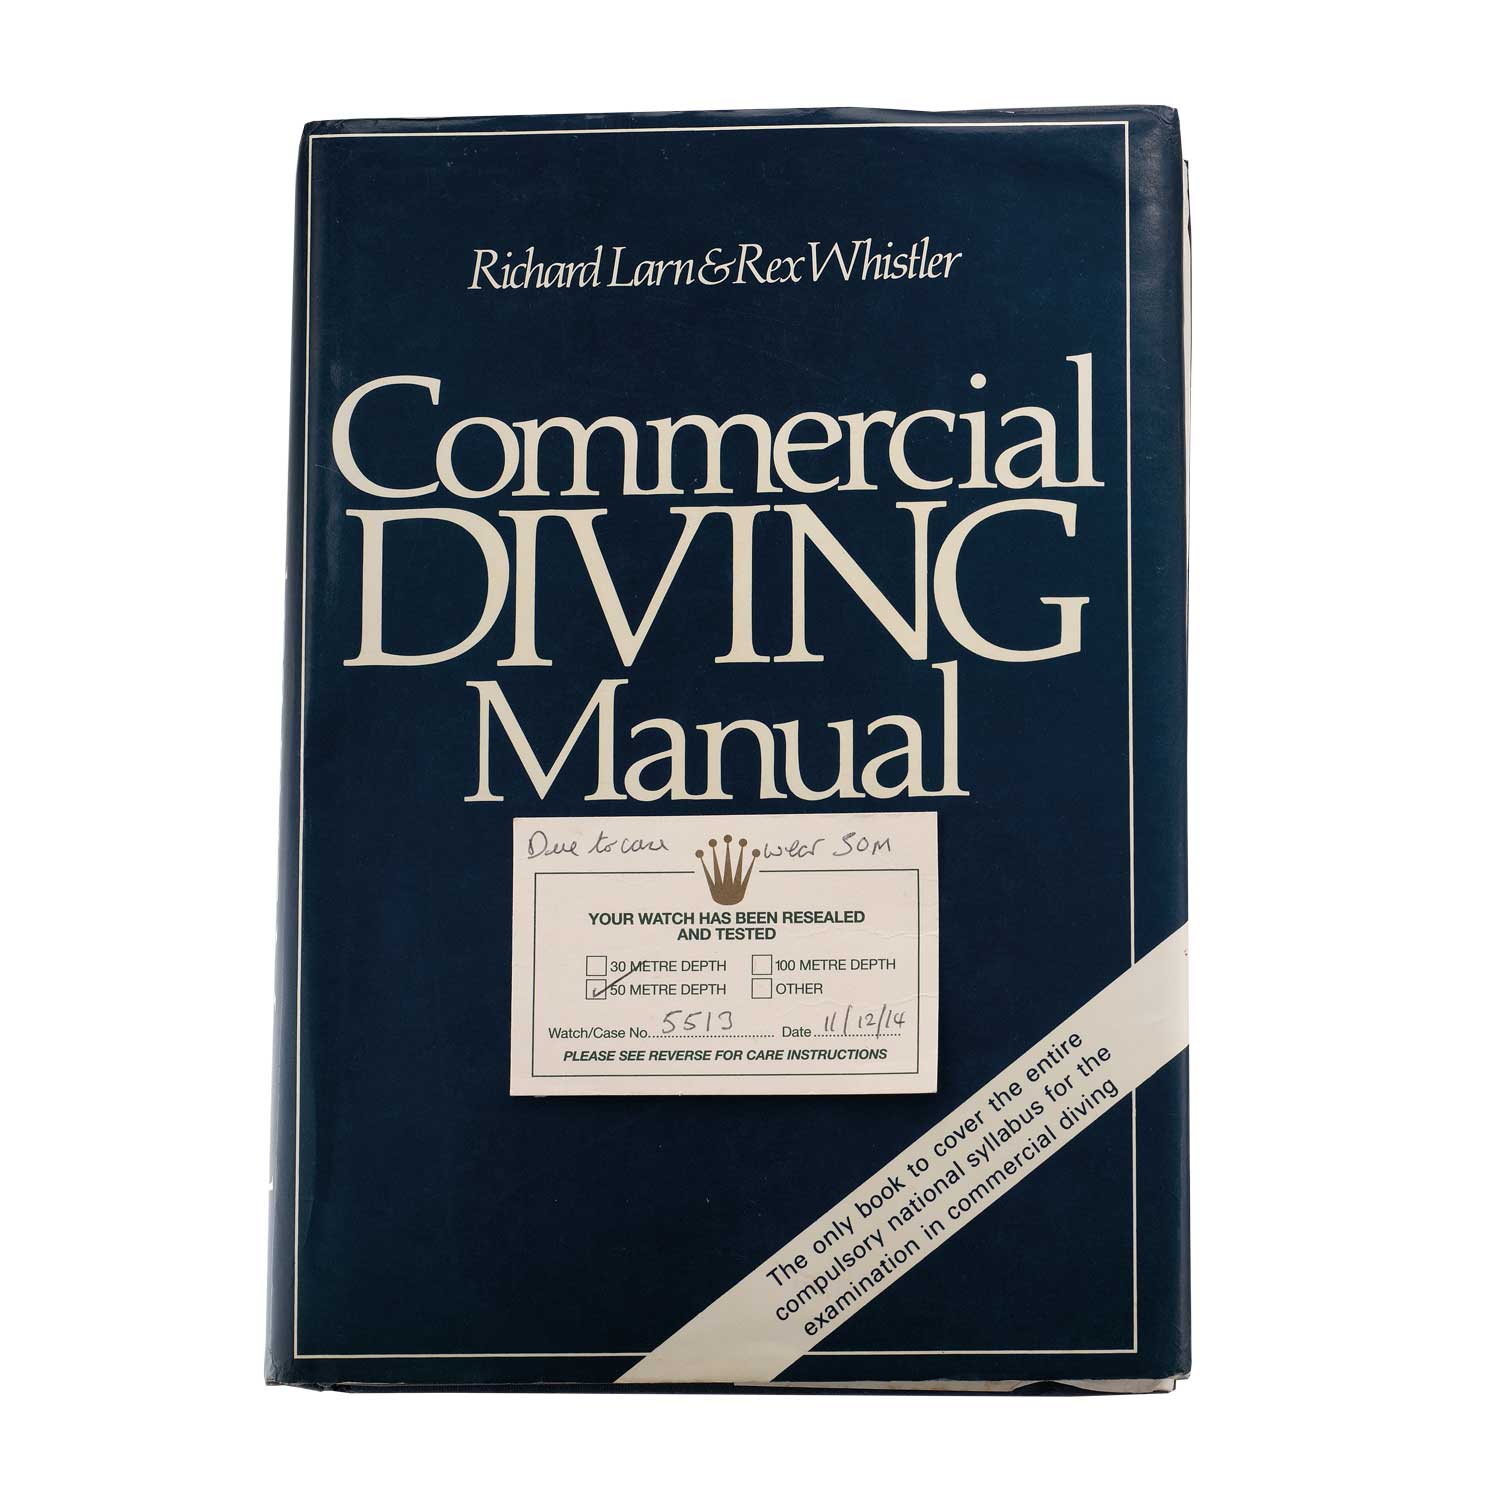 Whistler’s “Commercial Diving Manual” became the standard textbook for commercial diving training in the UK which is still in use today and is in its third edition.